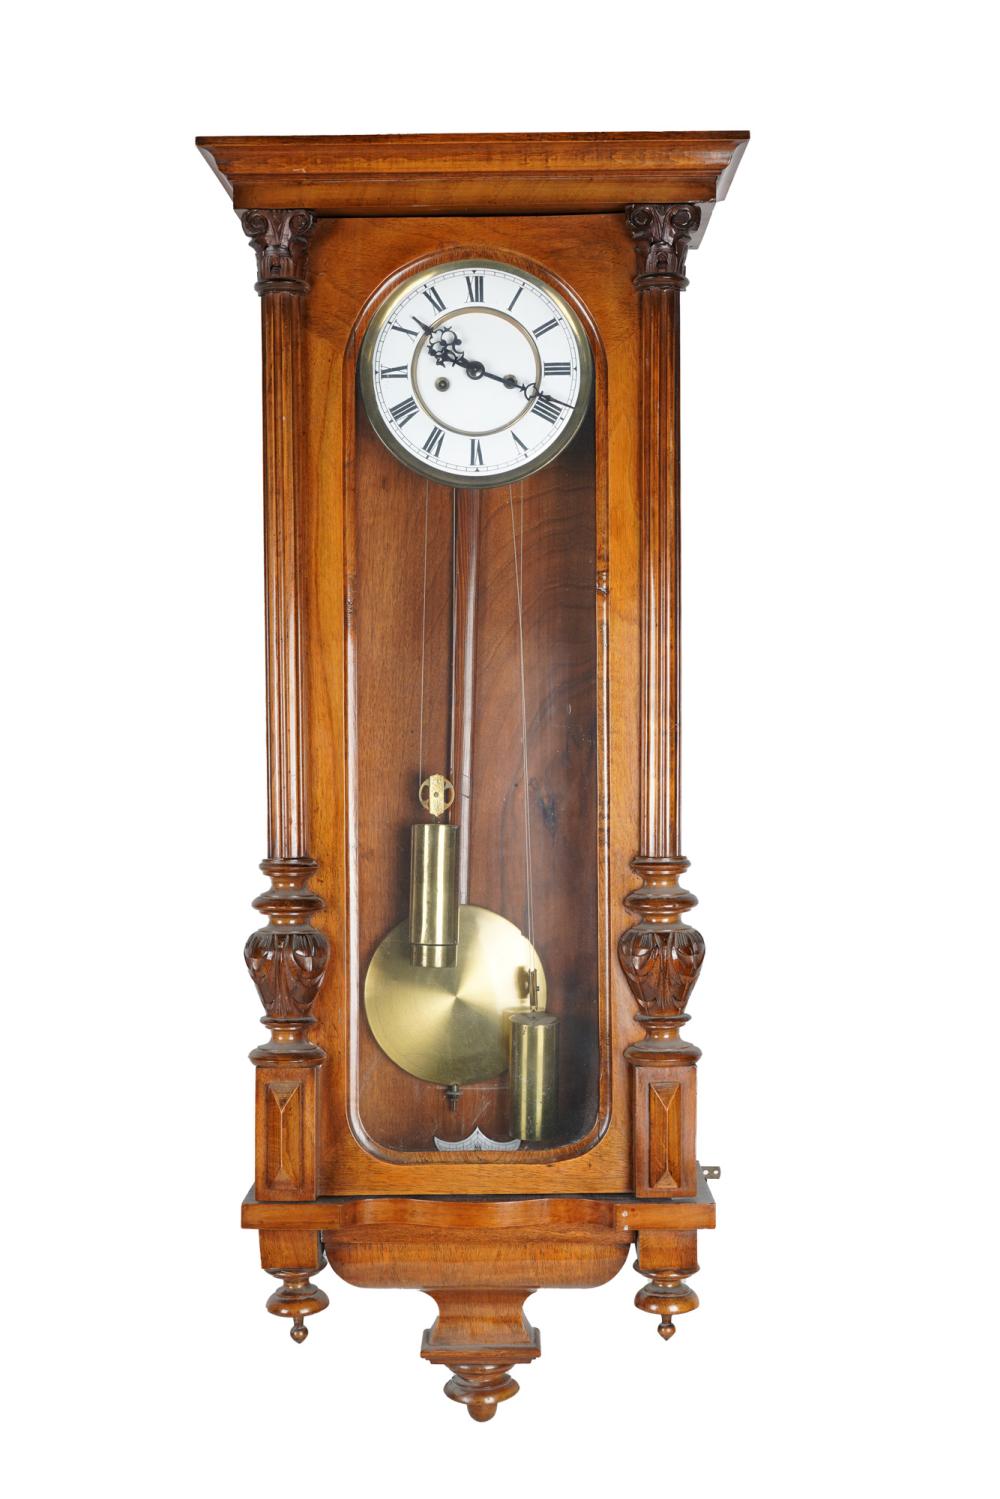 AUSTRIAN WALL CLOCKwith two weights